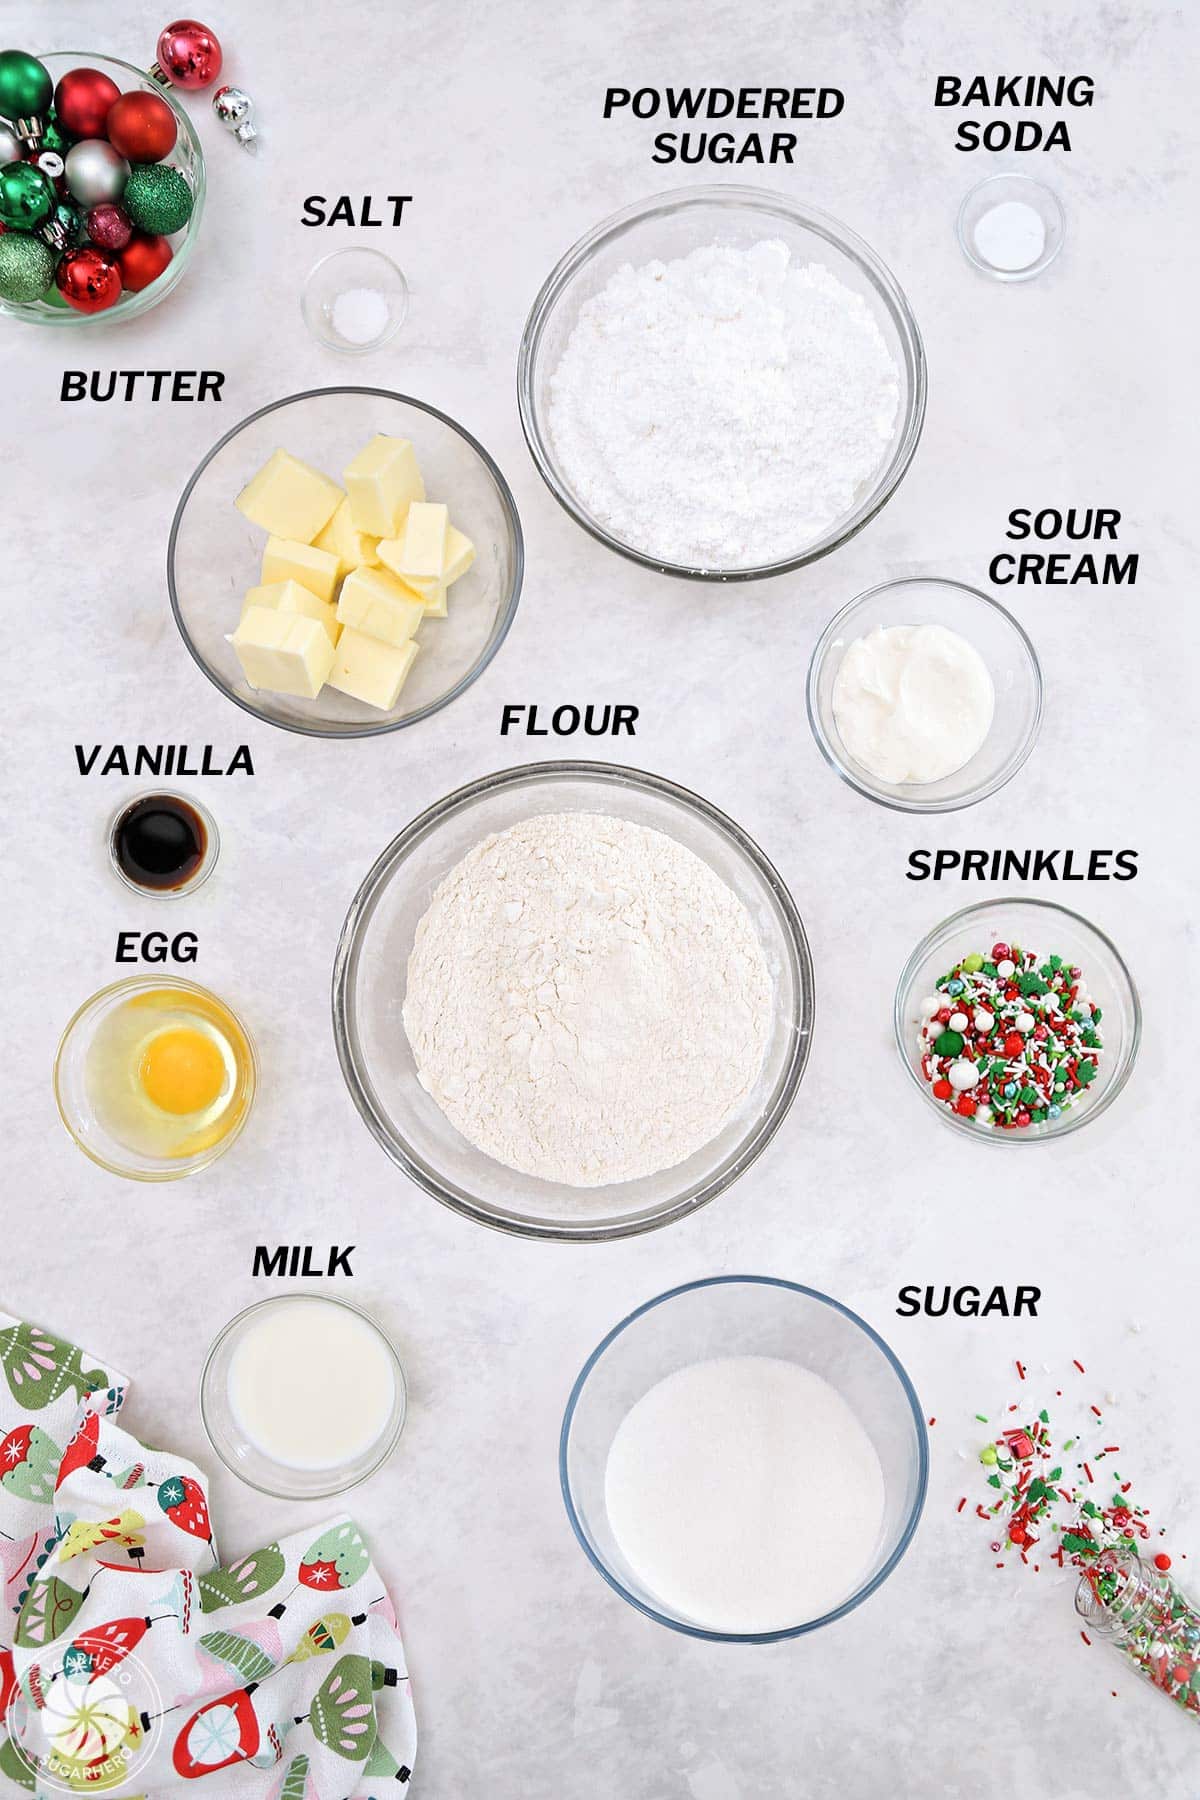 Ingredients for Big Soft Sugar Cookies measure out and labeled.